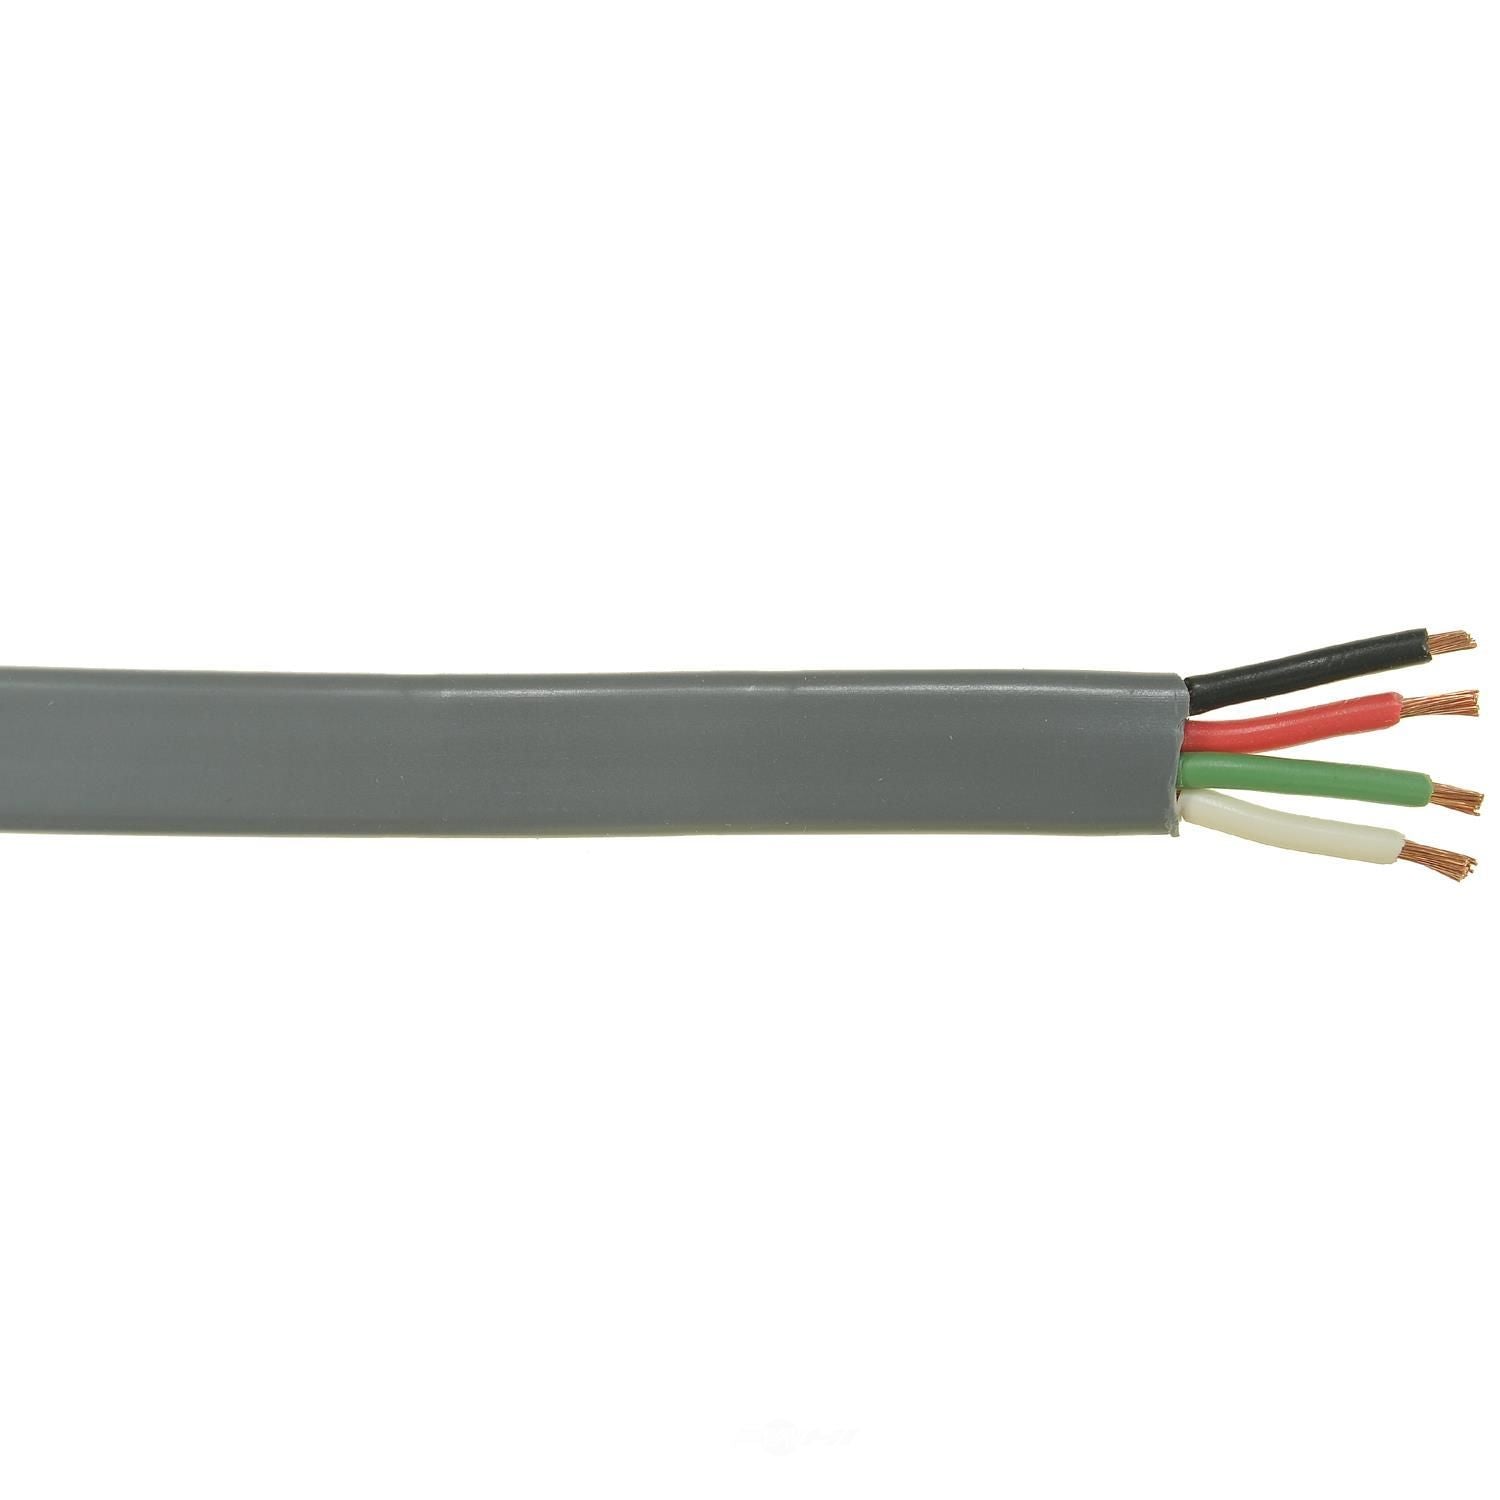 YSP WR130-100 Wells Flat Multi-Conductor Primary Wire (14G, 4 Wire)